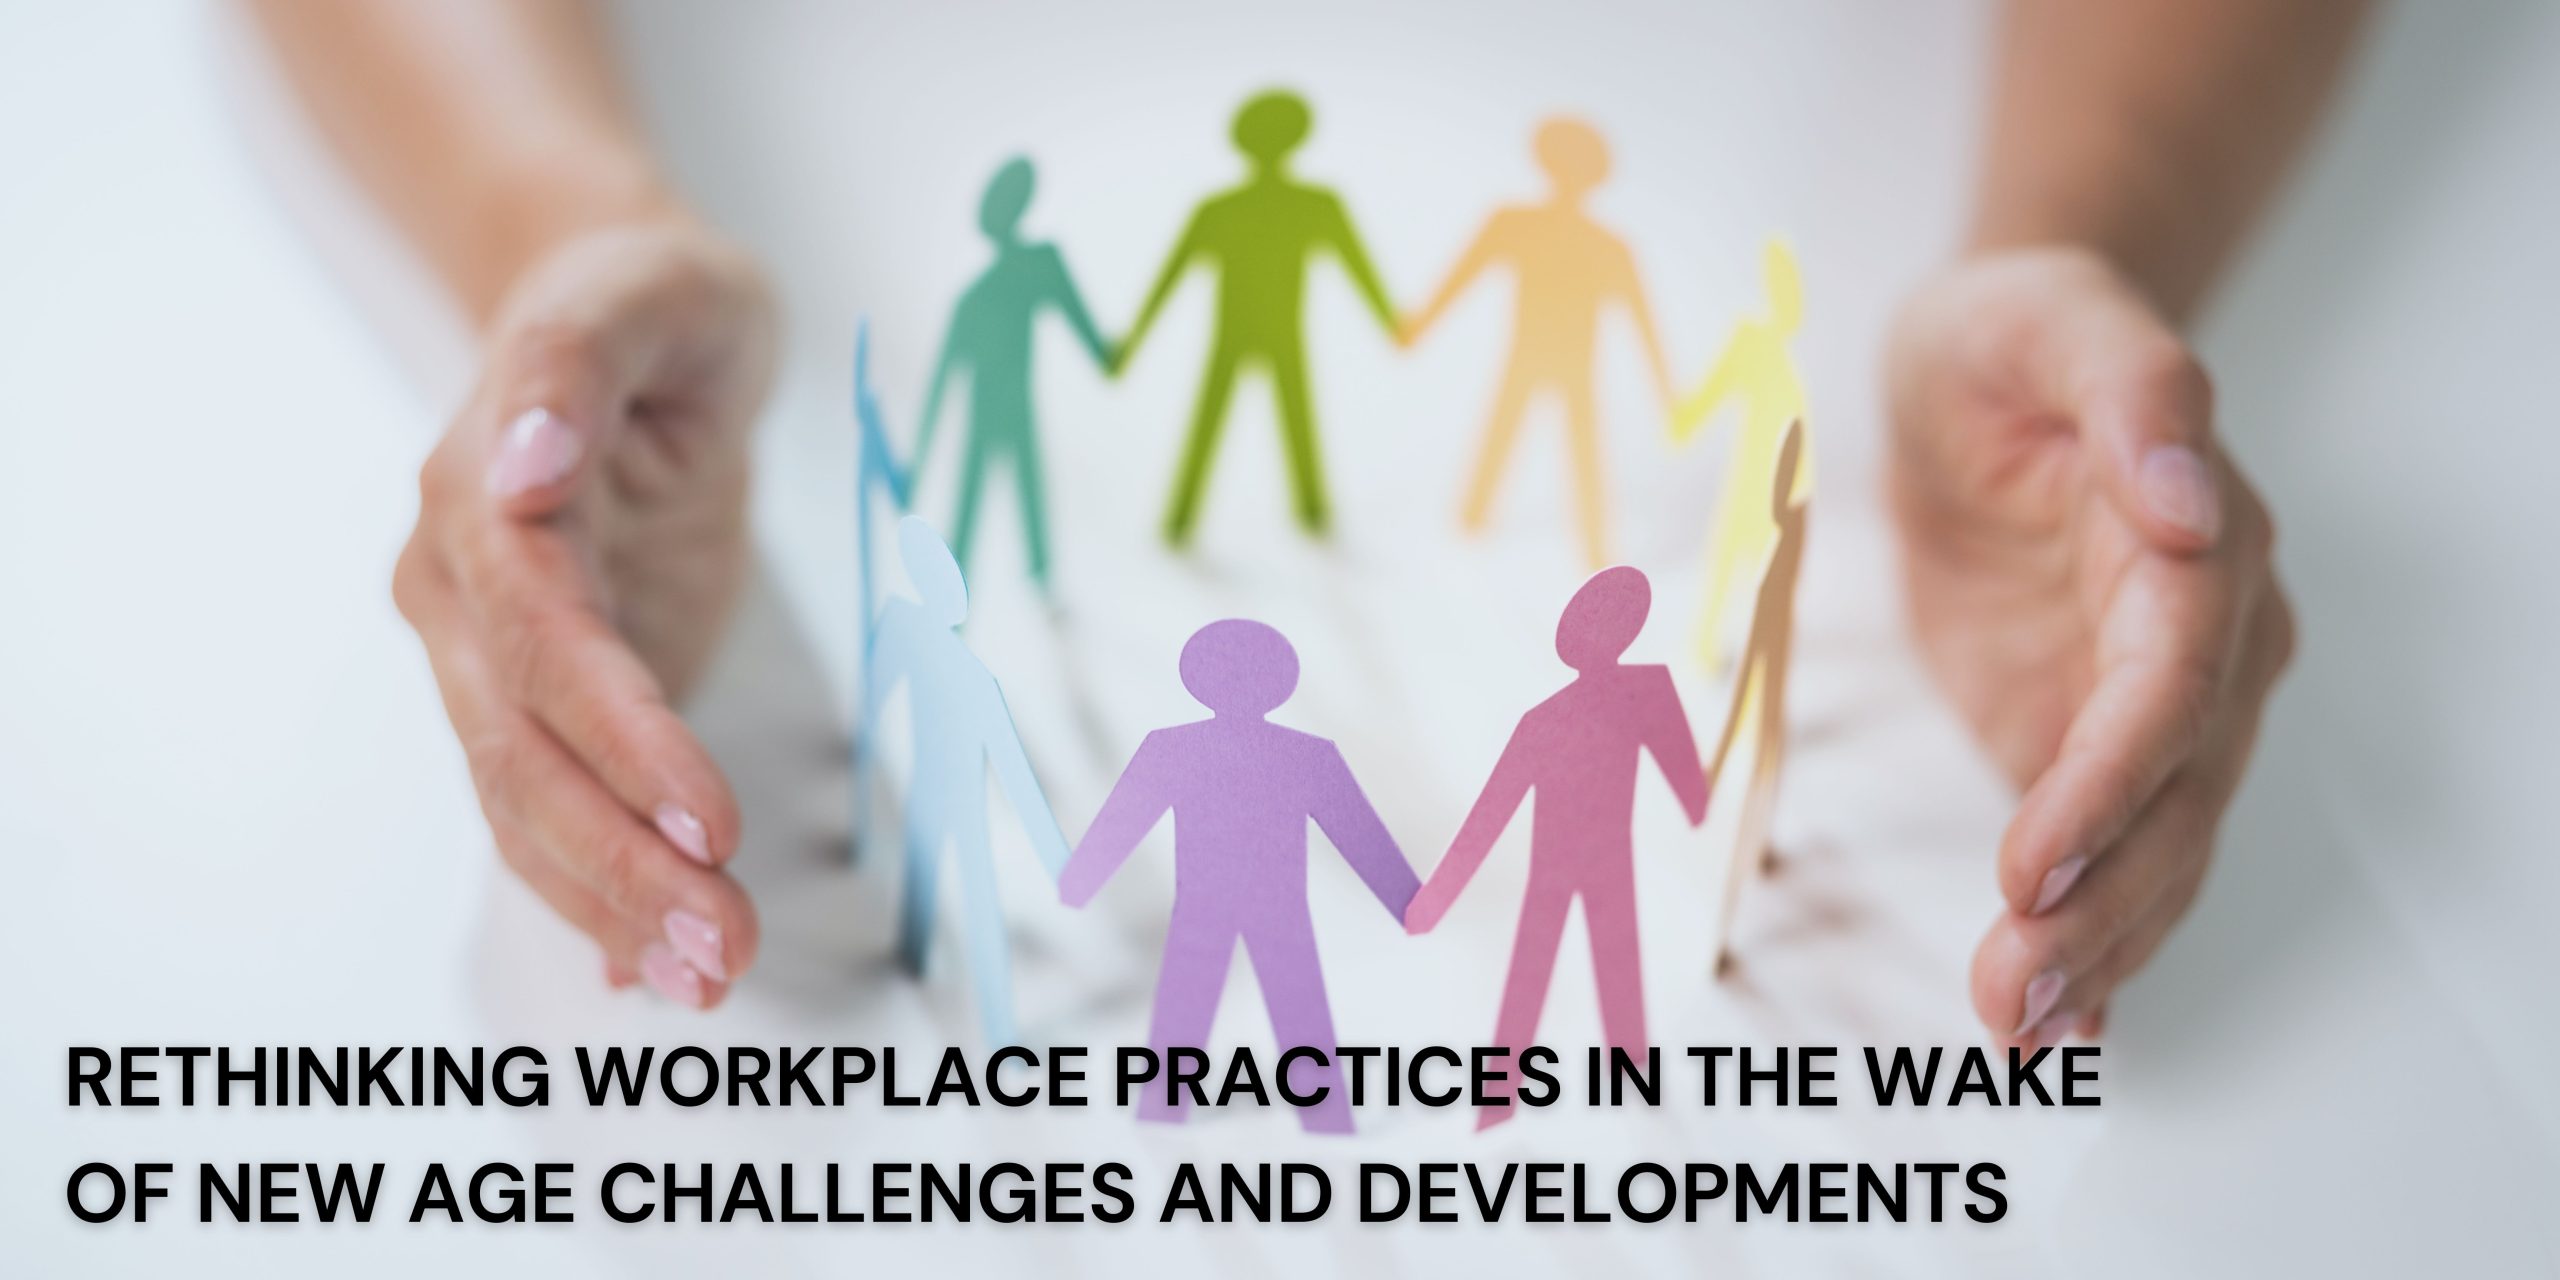 Seminar – Rethinking Workplace Practices In the Wake of New Age Challenges and Developments